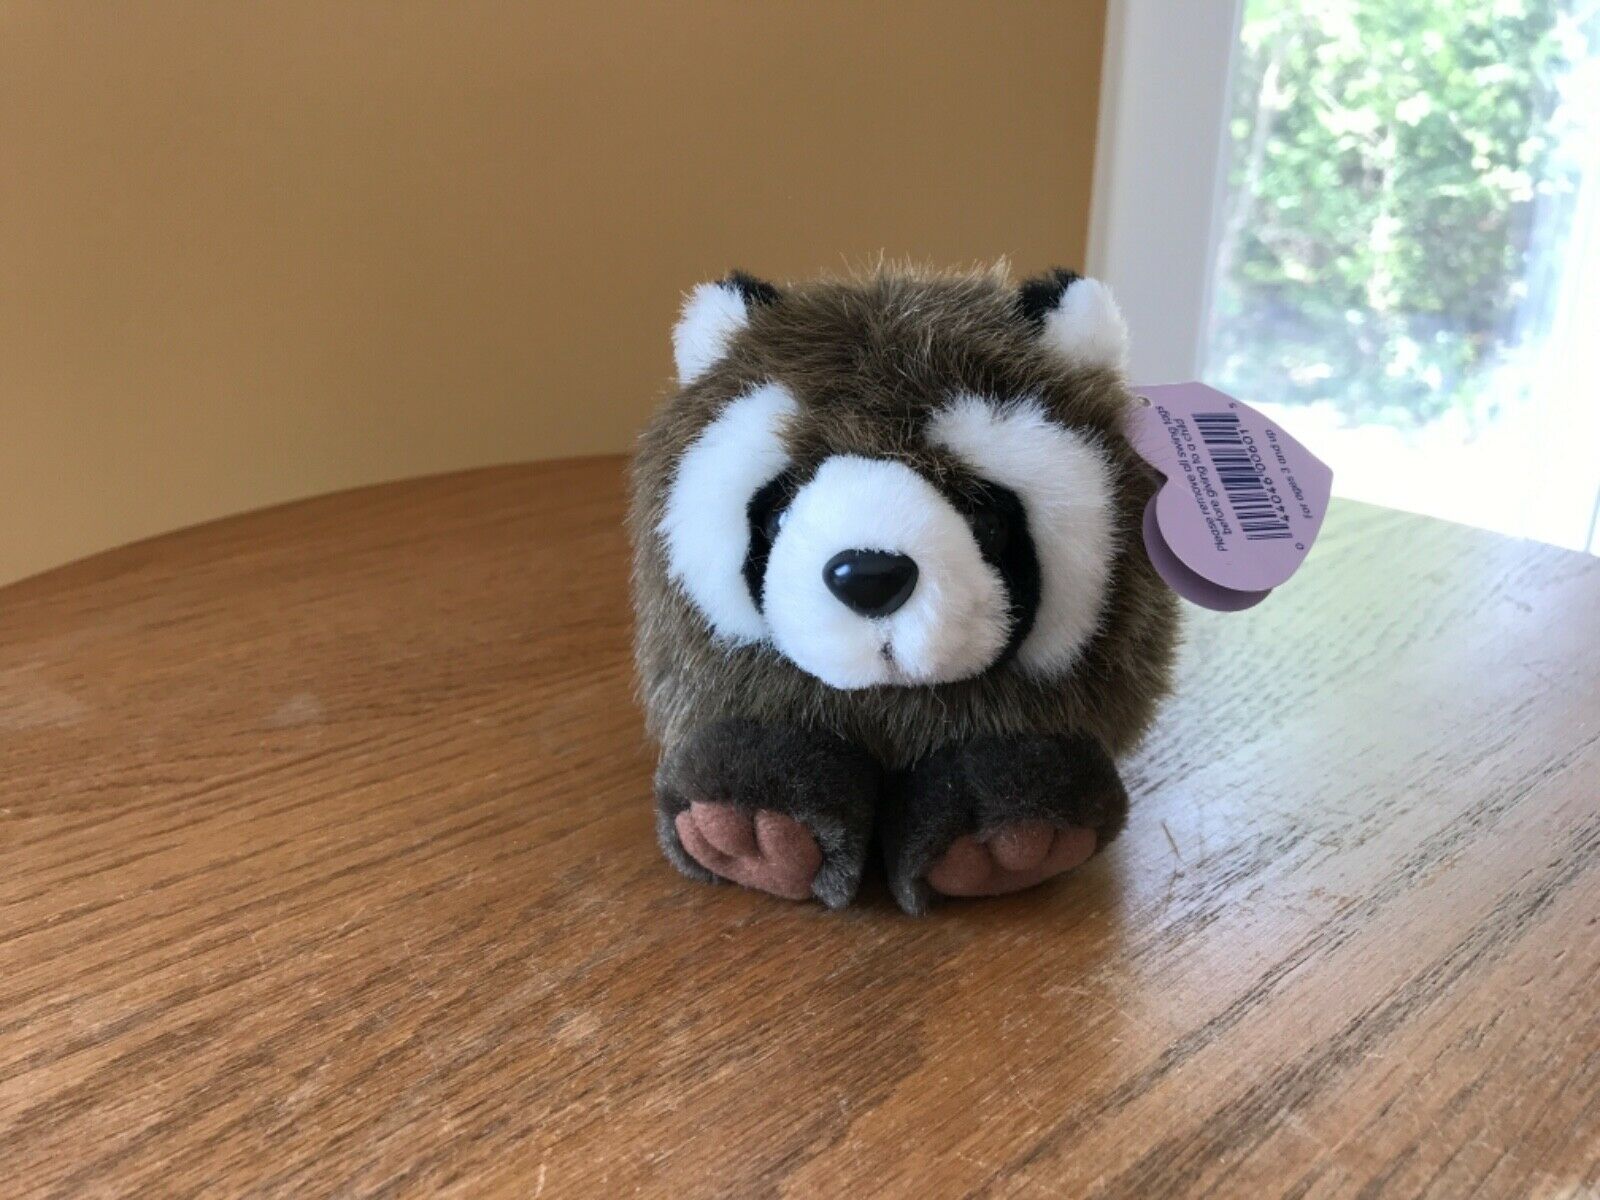 Vintage Puffkins Raccoon  Bandit  5” Swibco Plush Soft Toy Collectible 2-21-97